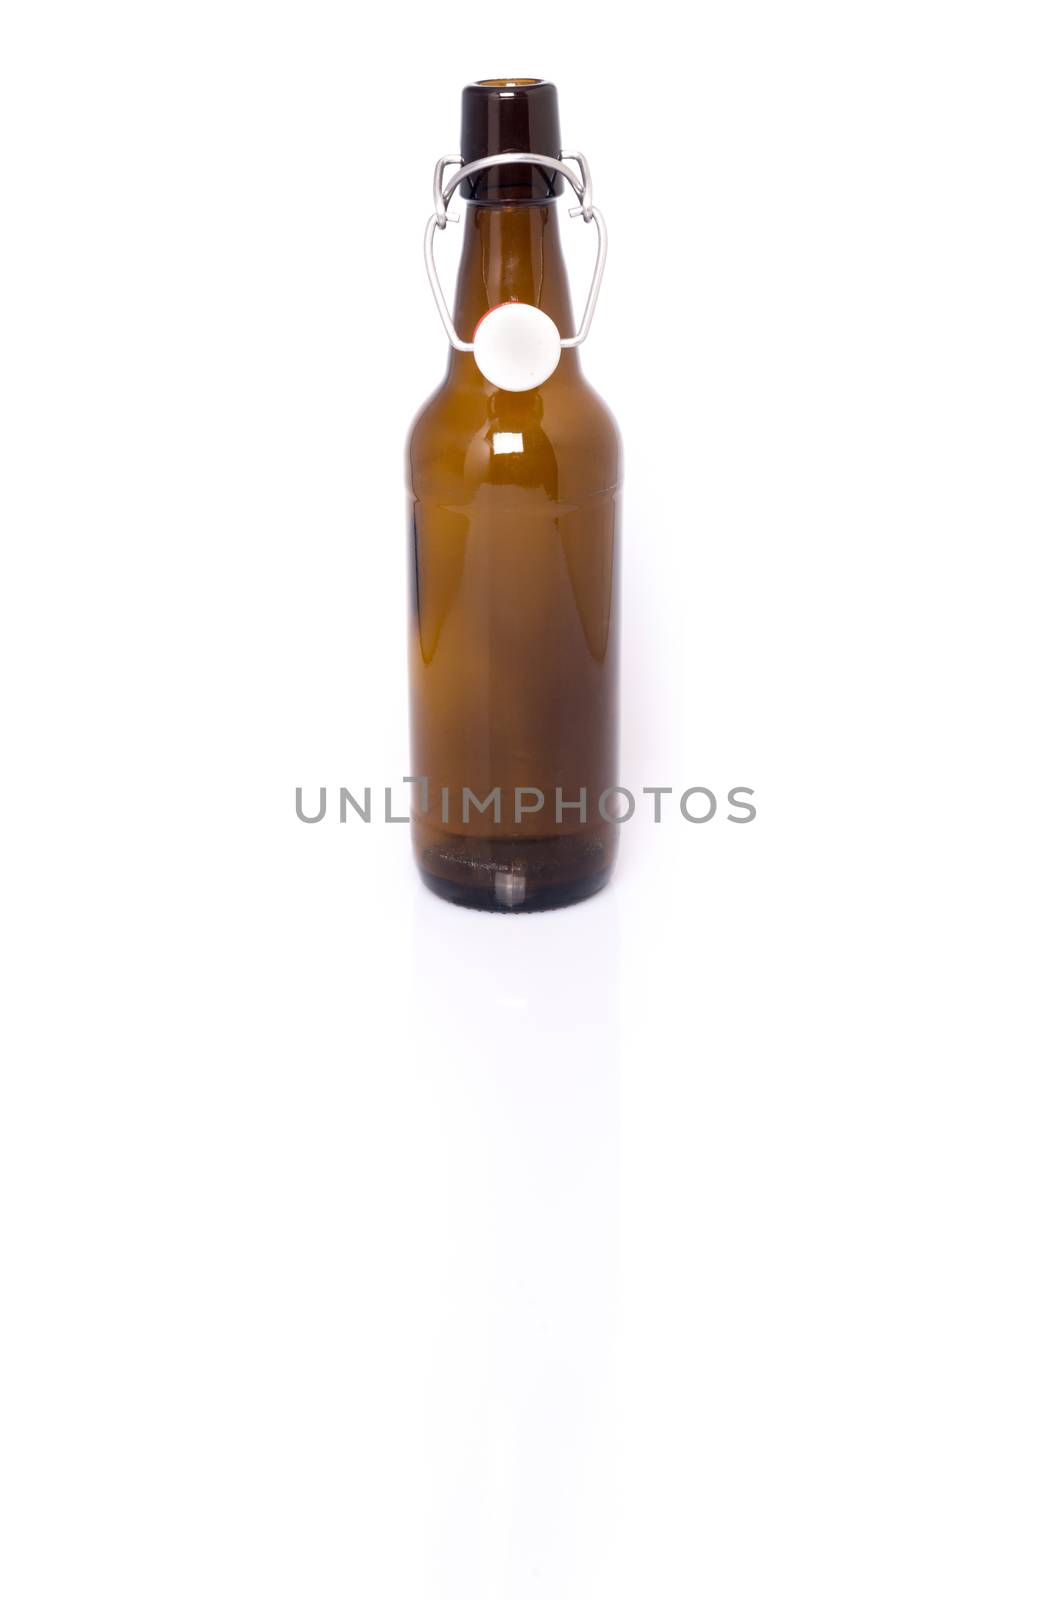 Traditional bavarian beer bottle with swing top with reflection and shadow on white. Labels removed for your own branding if needed.